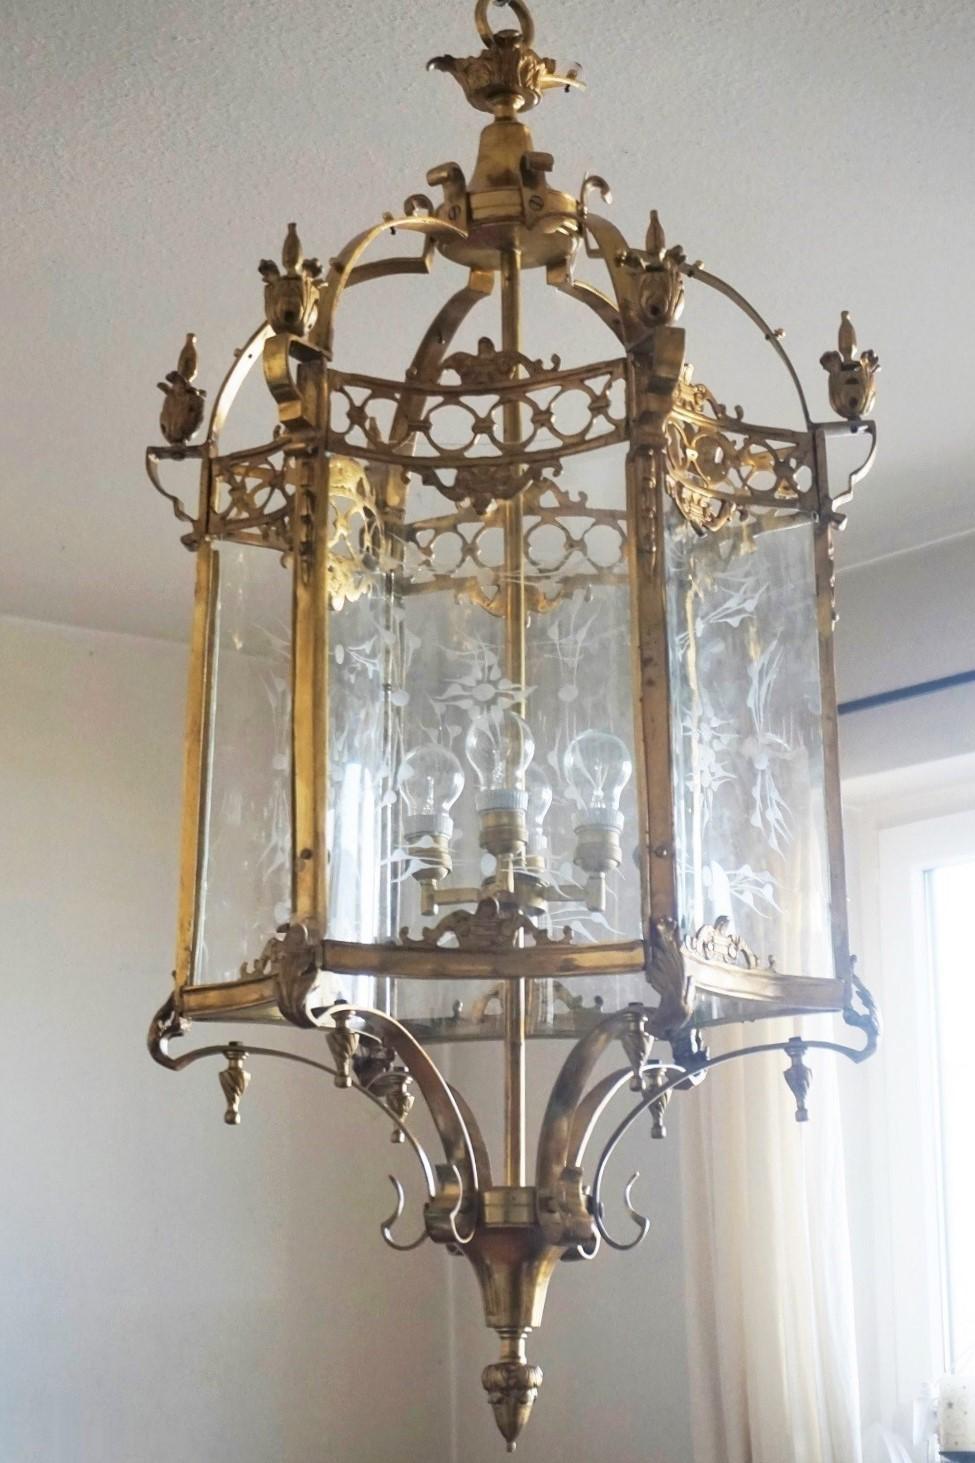 Very large Louis XVI style four-light hexagonal lantern, France, 1920-1930. The lantern is made of solid brass with integrated cast bronze details, six curved sides with curved cut glass panels. Chain and canopy included. Suitable for indoor use and